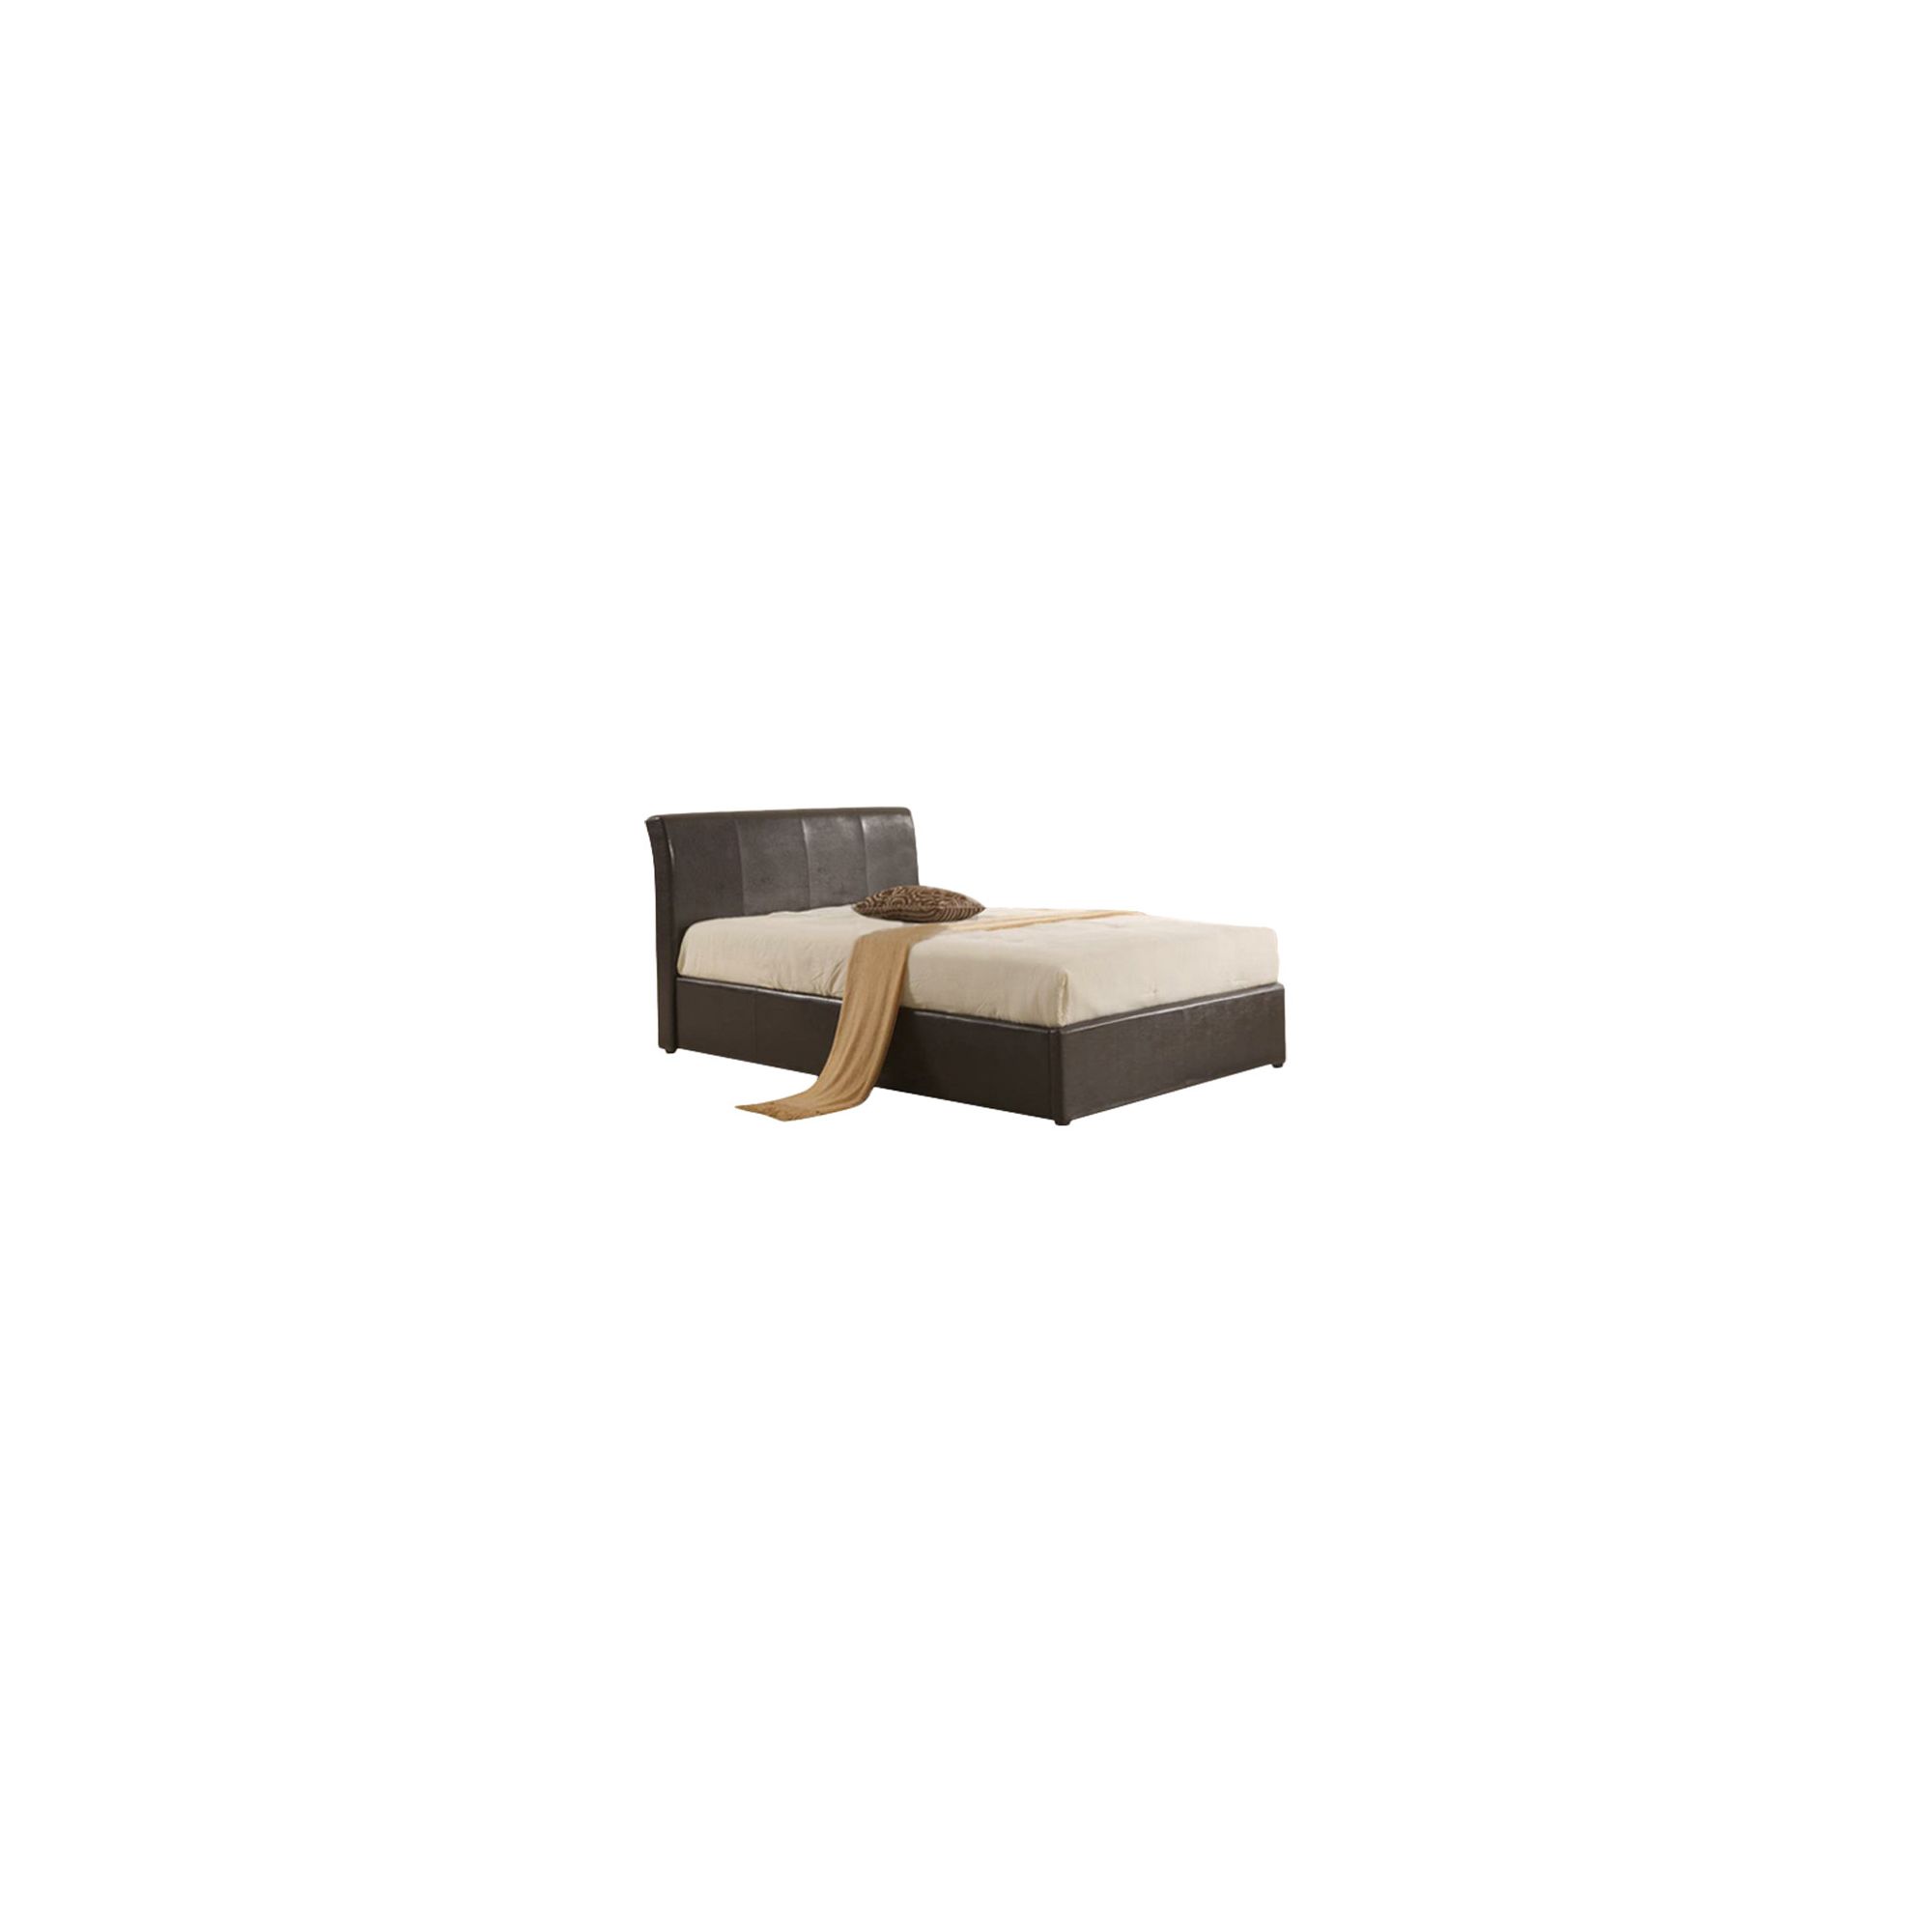 MetalBedsLtd Texas New Ottoman Bed - Black - Small Double at Tescos Direct